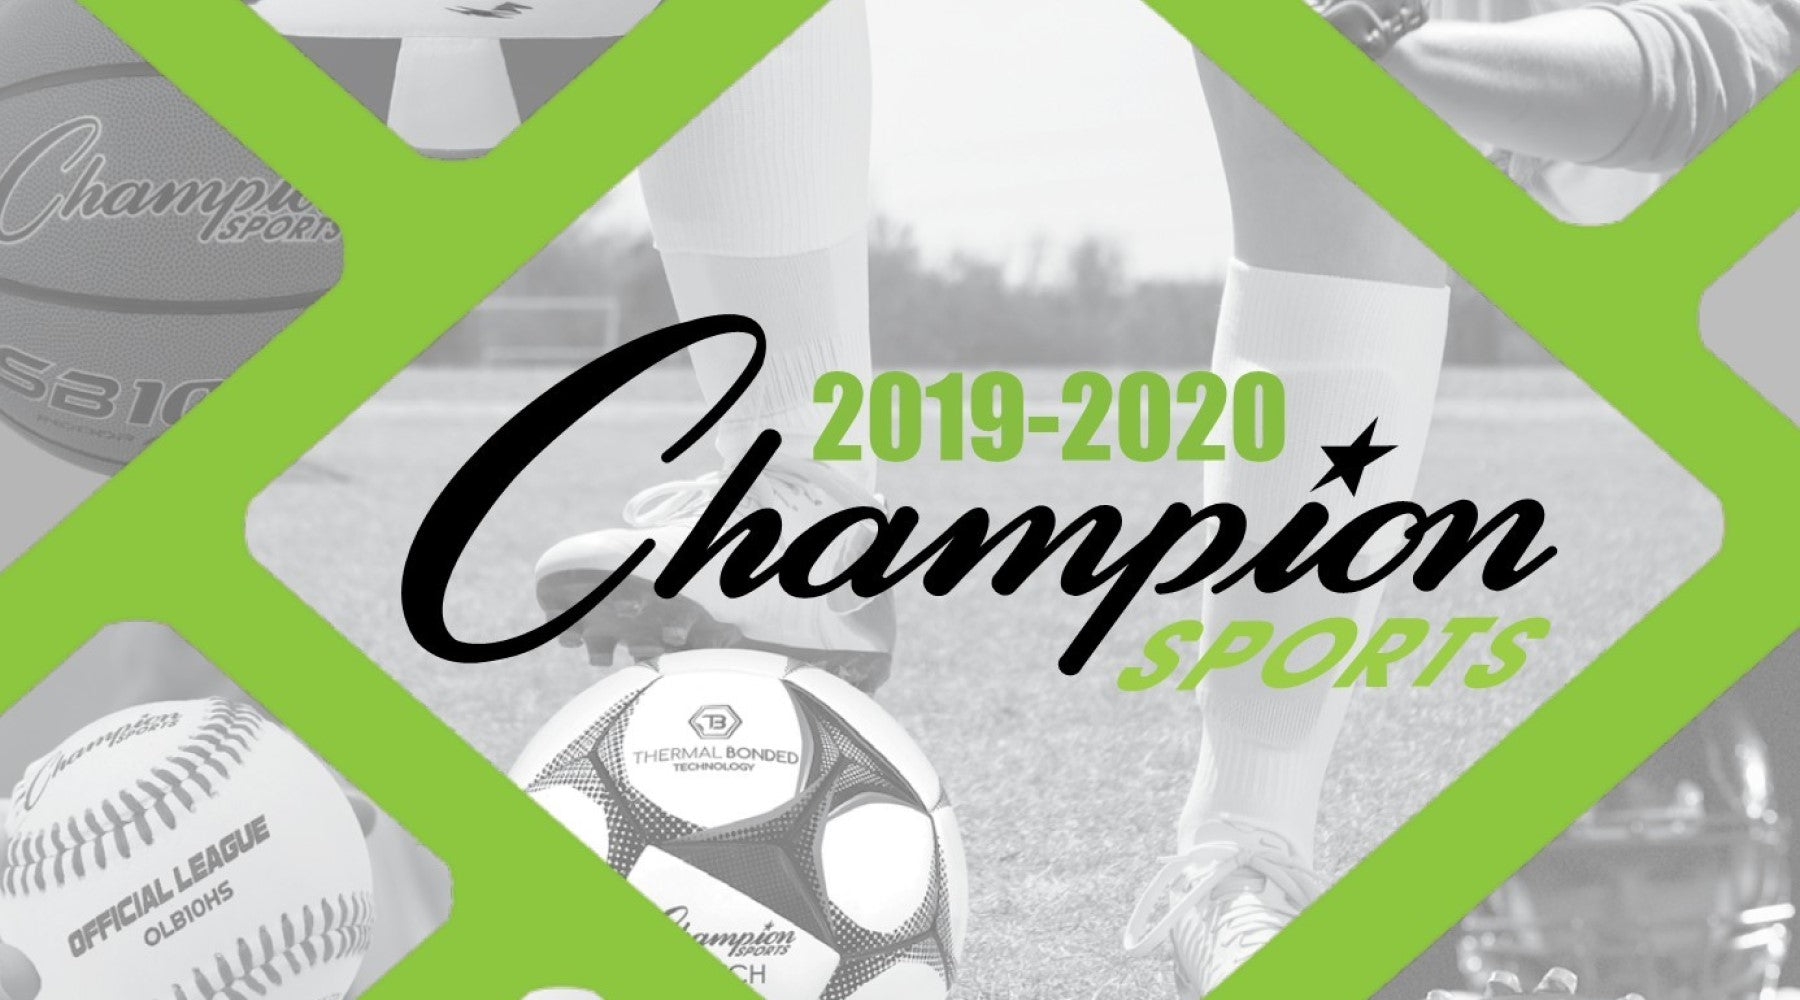 We now offer products from the full Champion Sports 2019-2020 catalog!